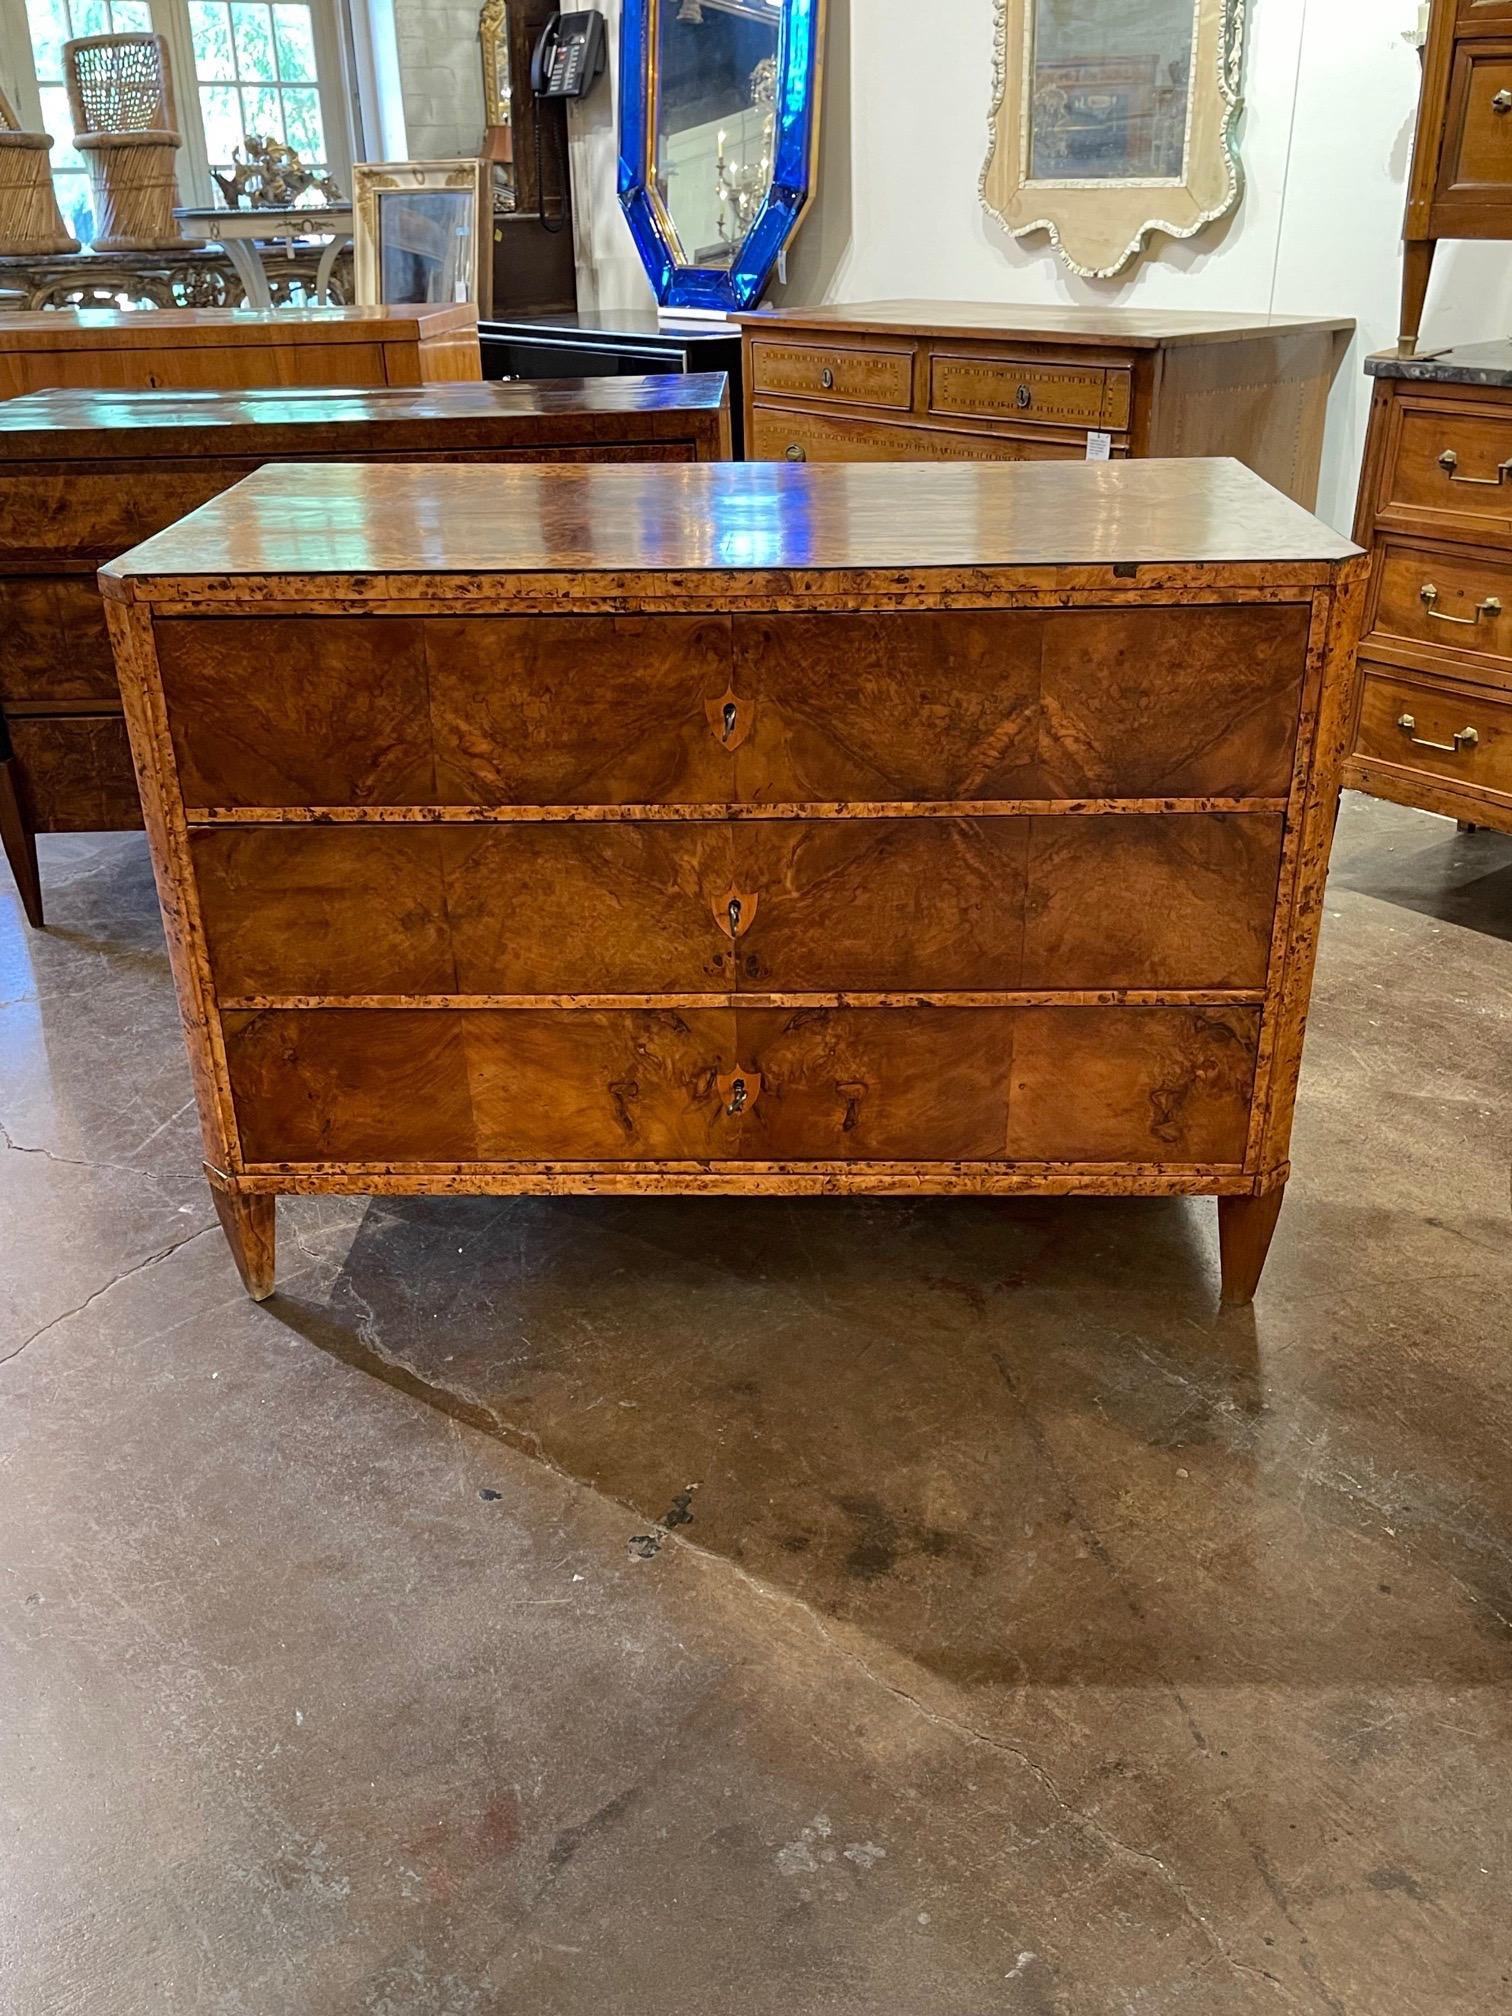 Exceptional early 19th century German Biedermeier walnut and elm commode. Very fine quality with lots of variation in the wood. A gorgeous classic!